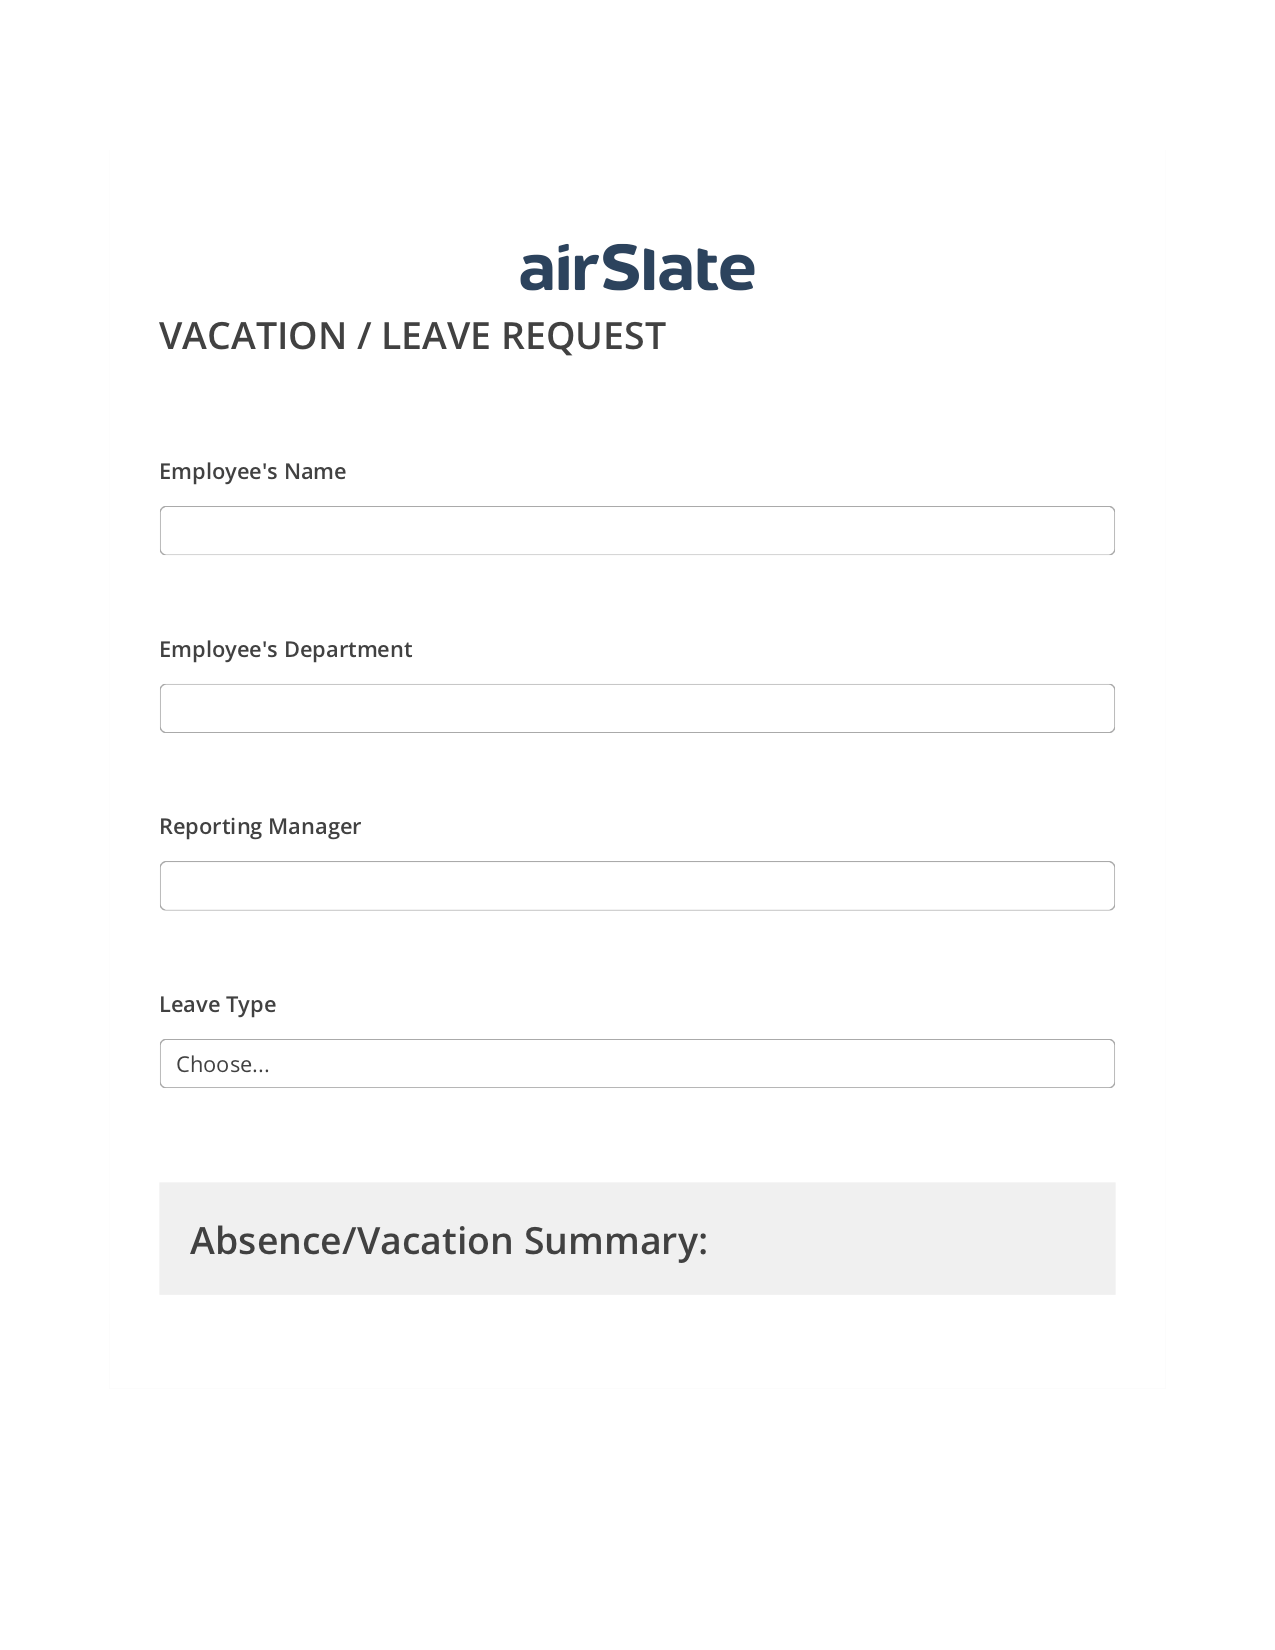 Vacation/Leave Request Workflow Pre-fill from MS Dynamics 365 Records, Add Tags to Slate Bot, Export to Smartsheet